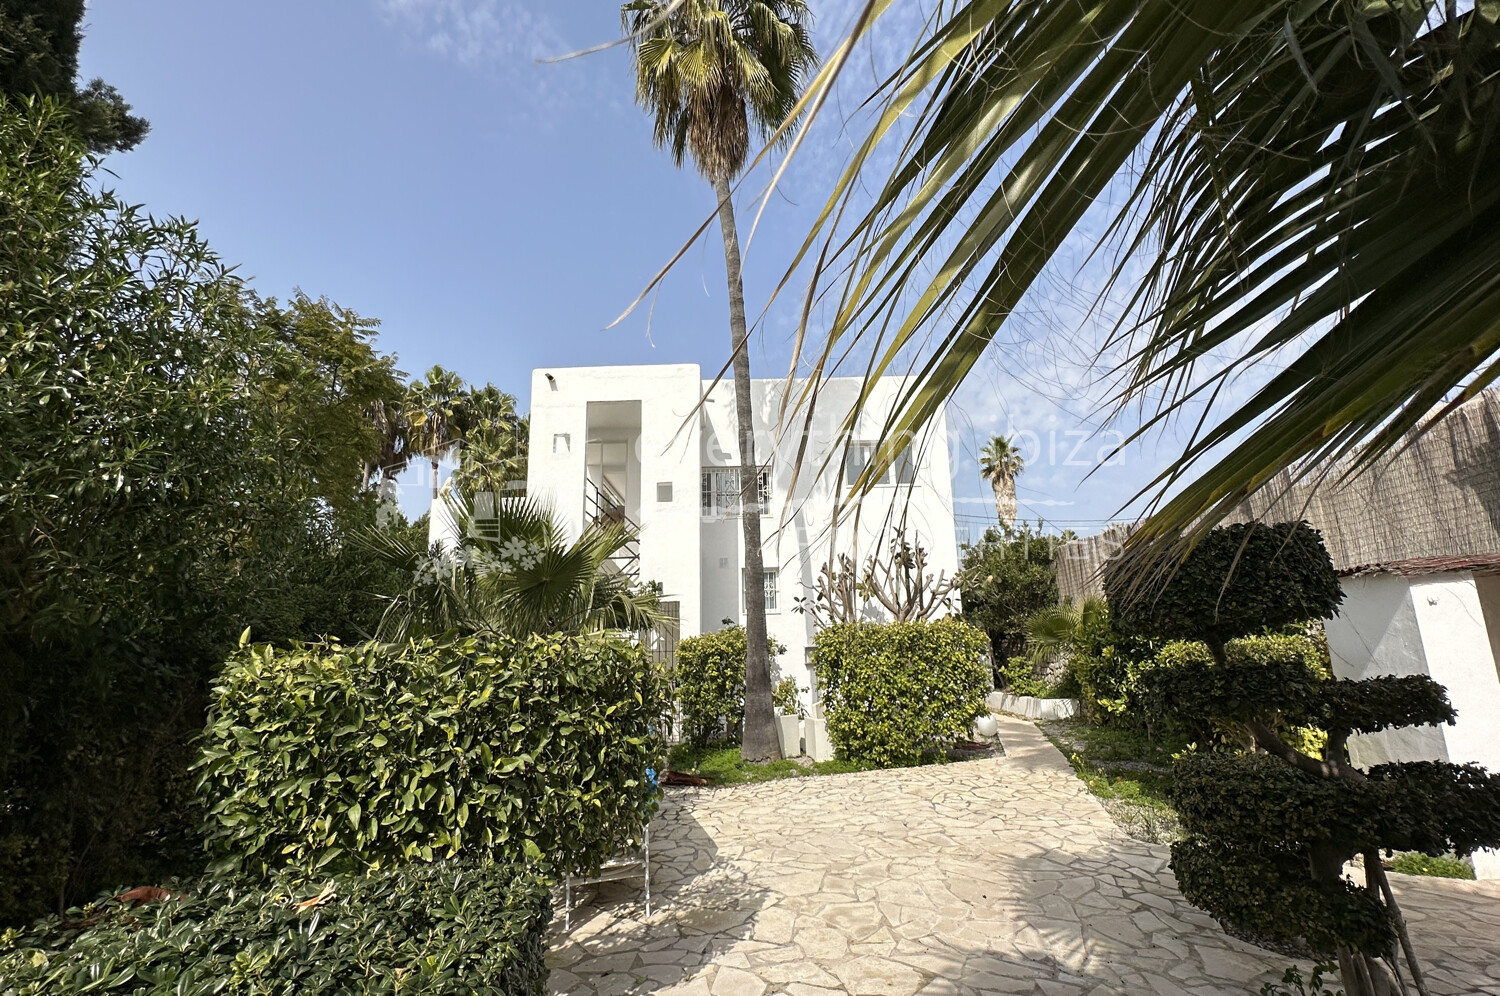 Lovely Spacious Villa in Popular Talamanca Close to the Beach, ref. 1539, for sale in Ibiza by everything ibiza Properties